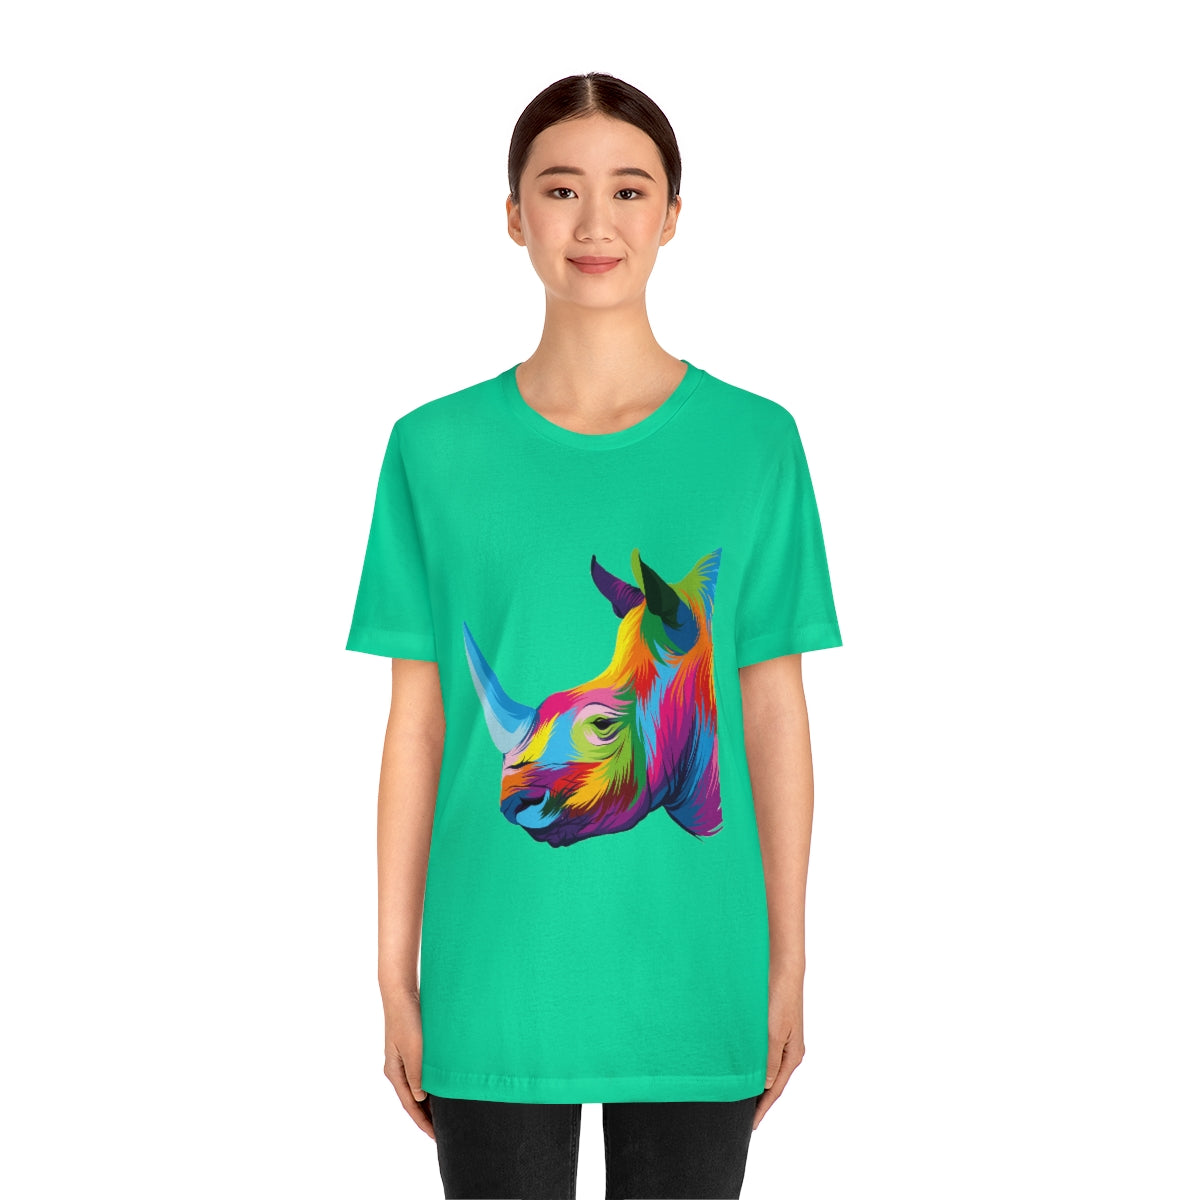 Unisex Jersey Short Sleeve Tee "Abstract colorful Rhino"